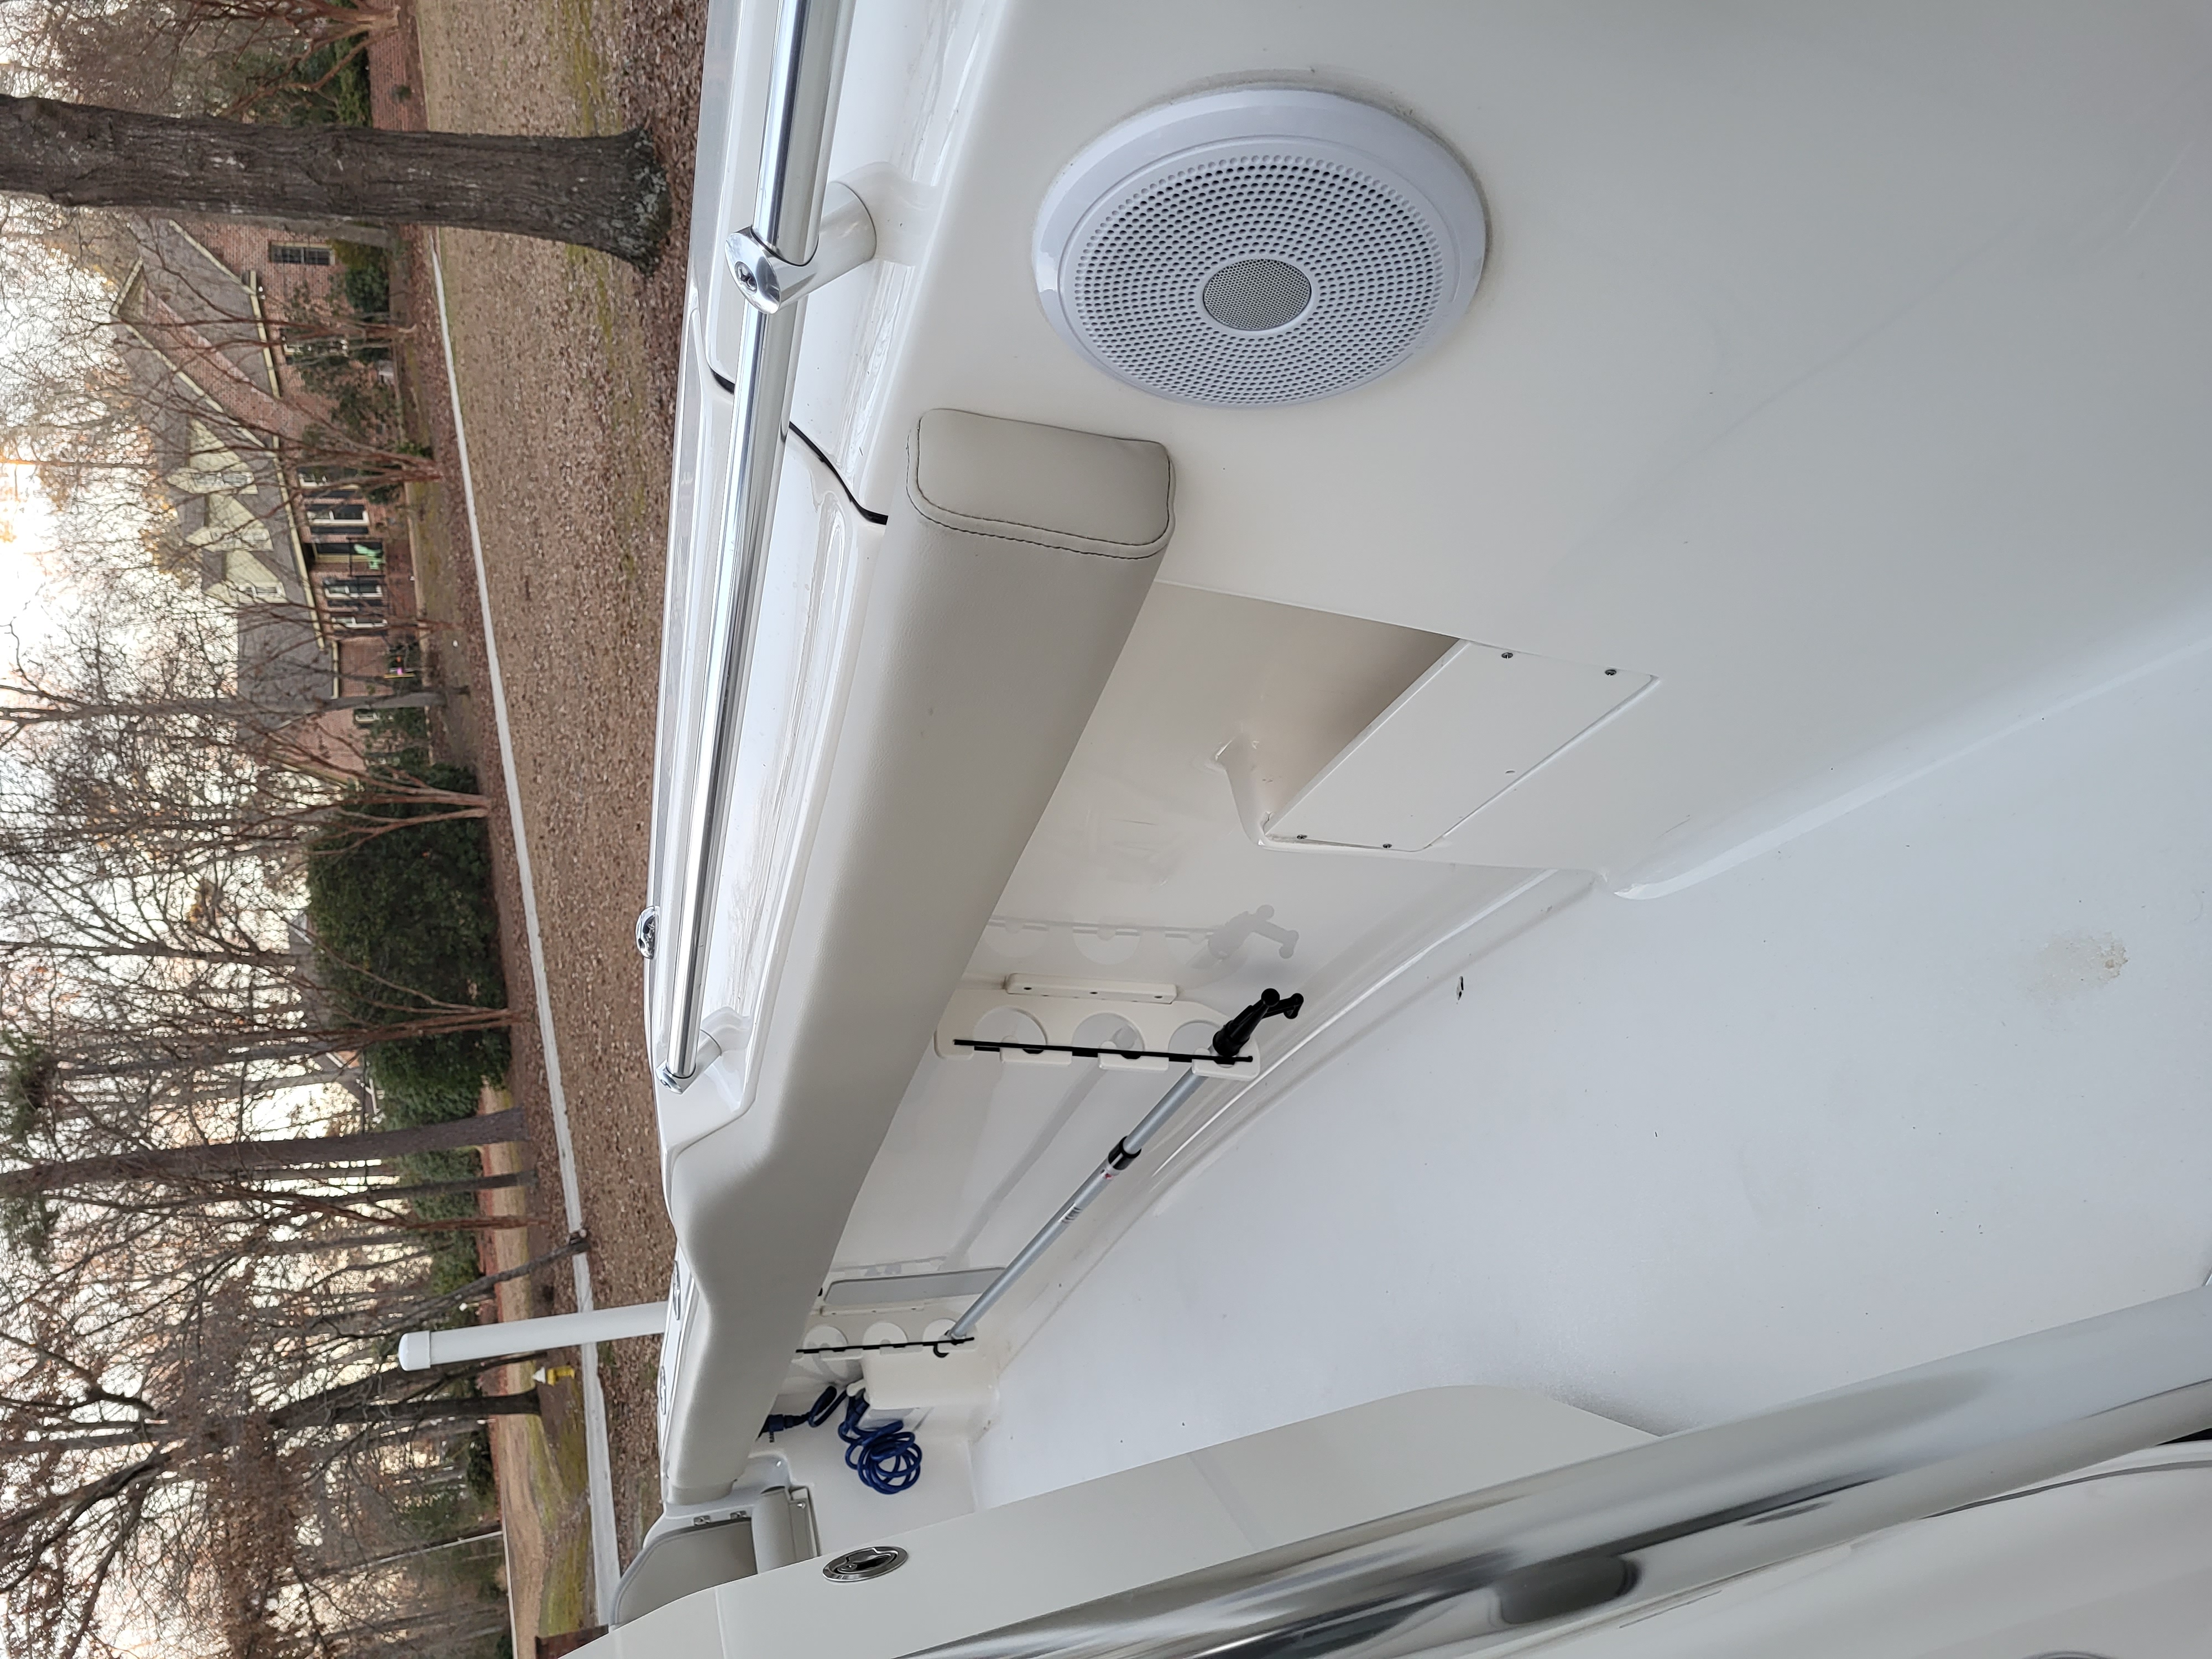 2022 Key West 239FS Power boat for sale in Laurinburg, NC - image 11 